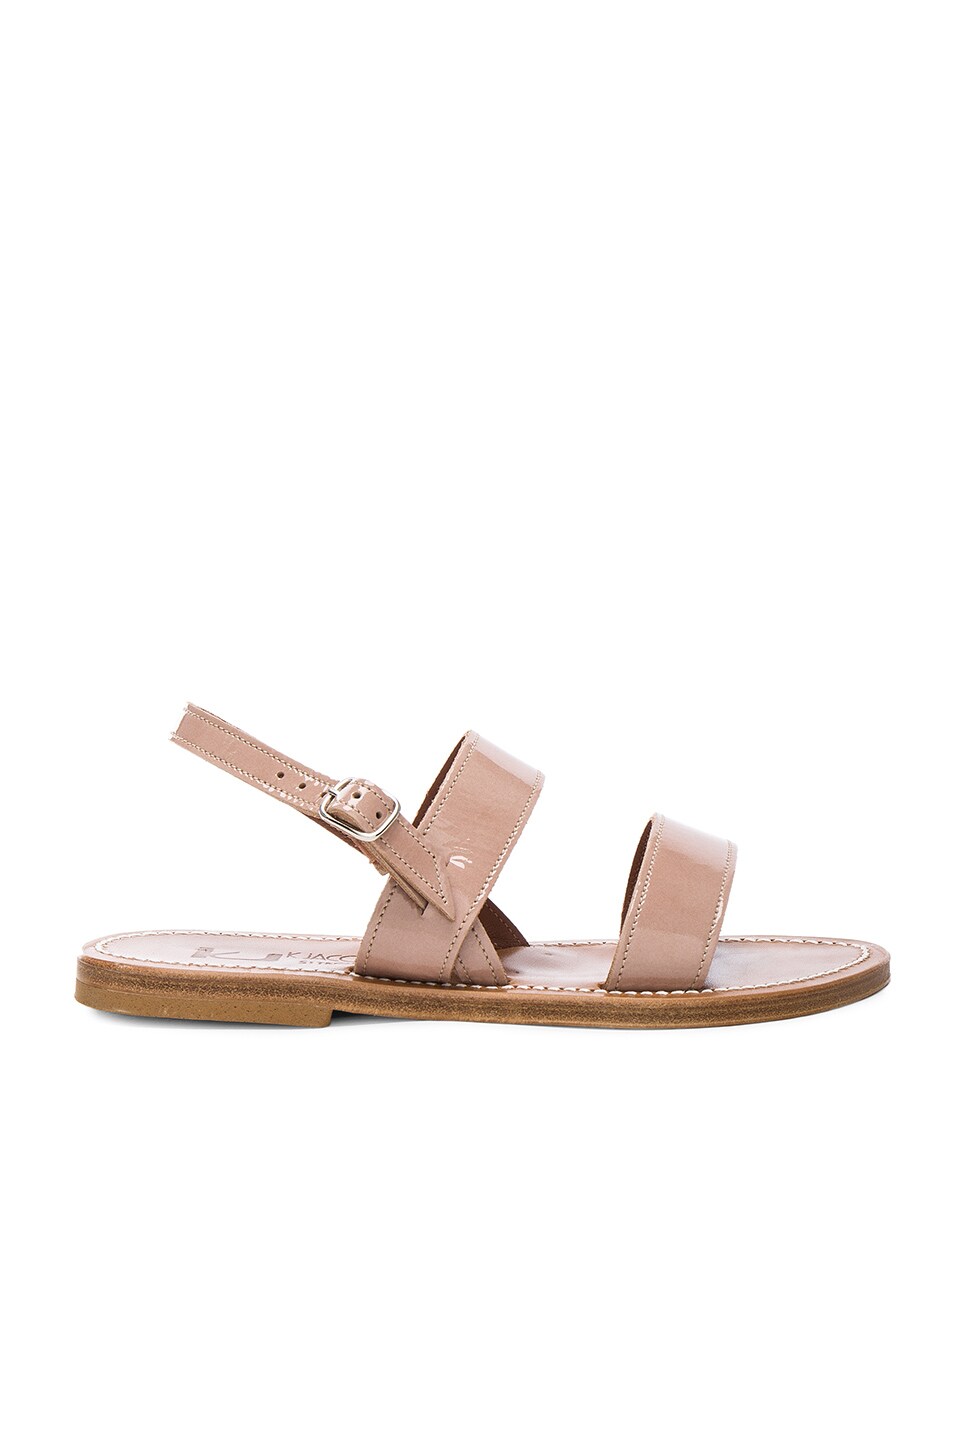 Image 1 of K Jacques Patent Leather Barigoule Sandals in Mira Adra